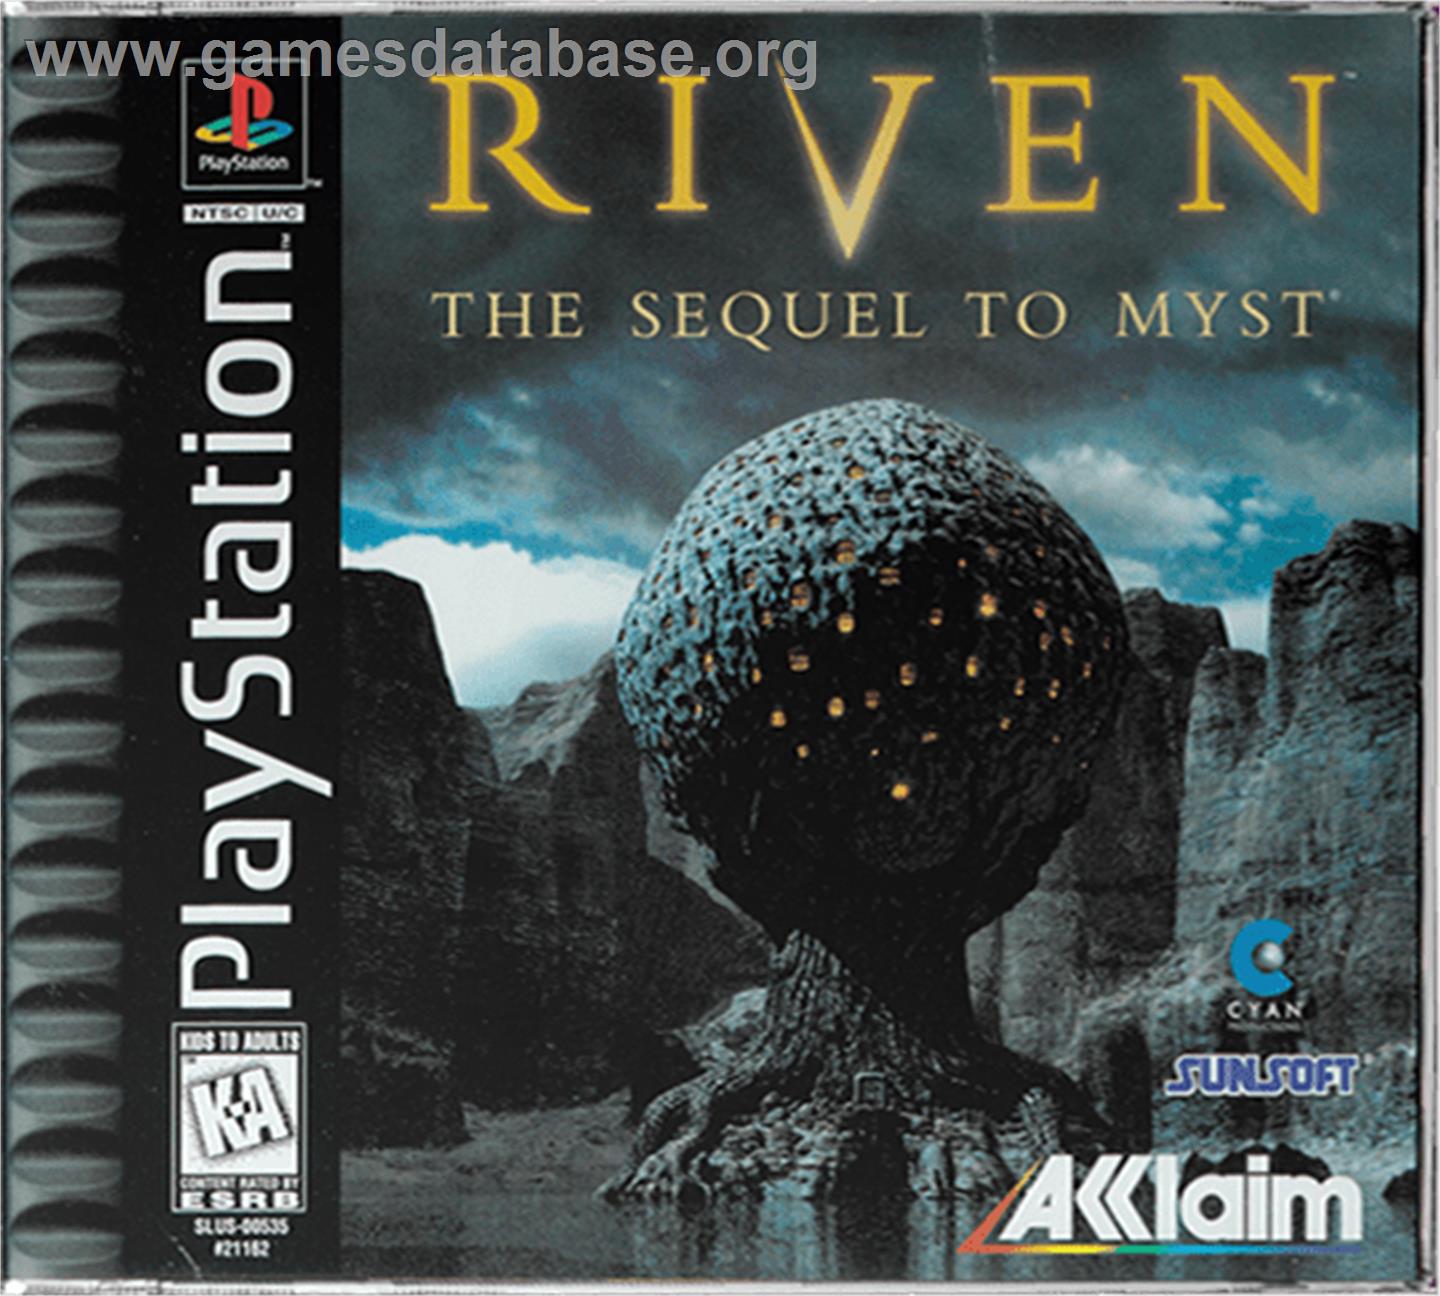 Riven: The Sequel to Myst - Sony Playstation - Artwork - Box